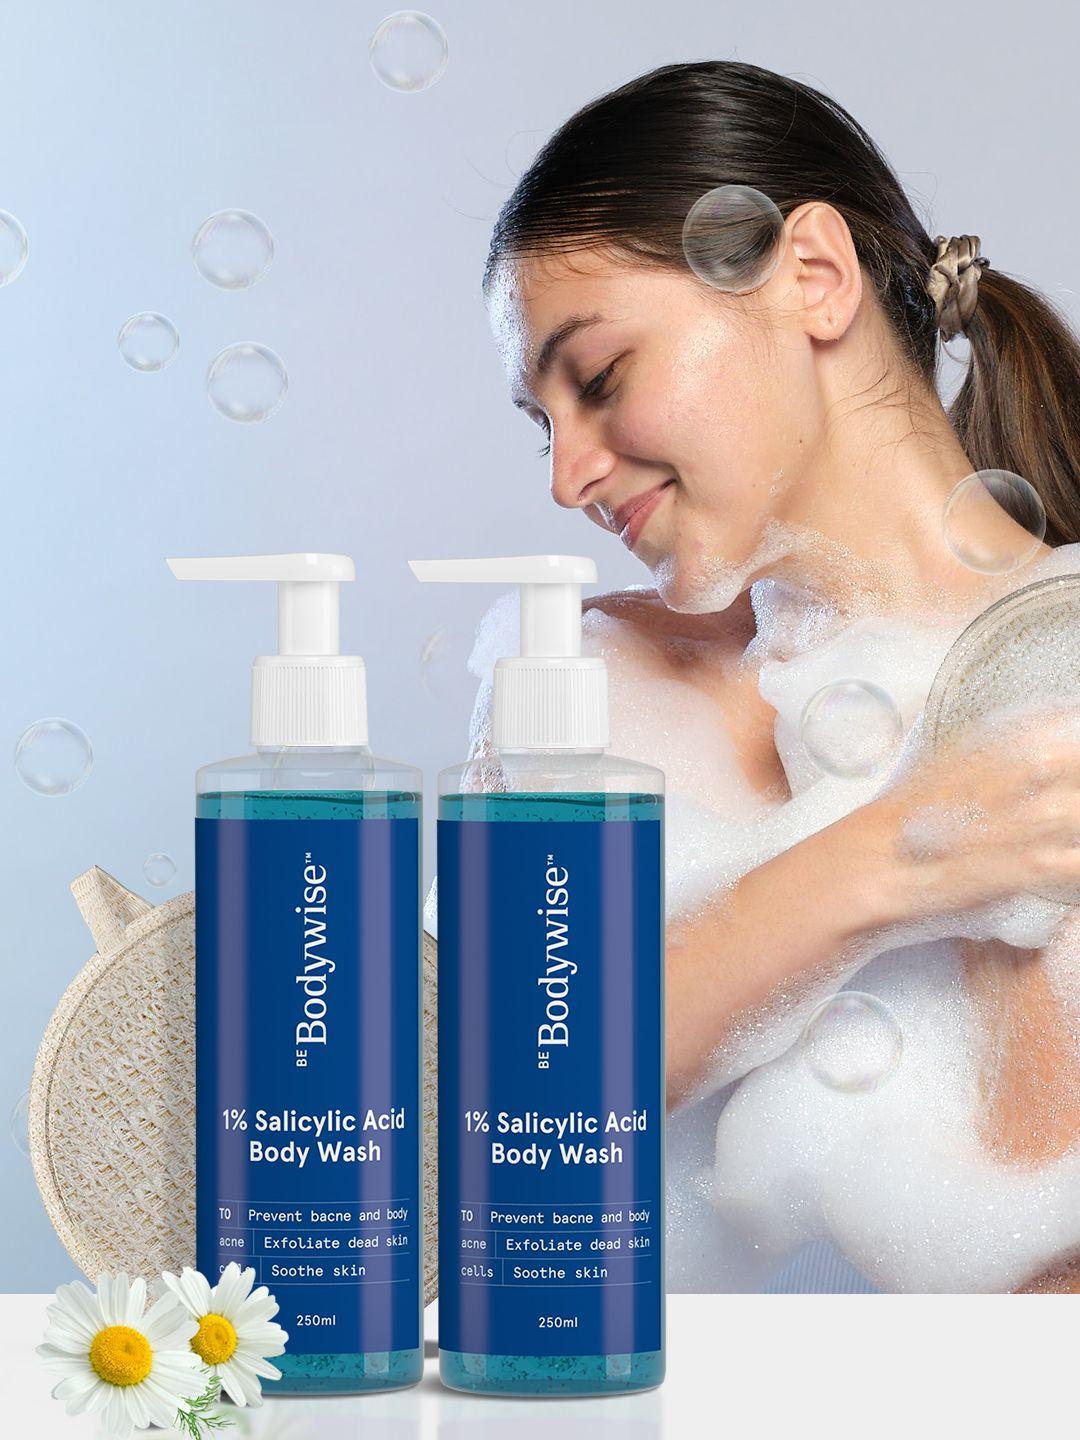 be bodywise set of 2 salicylic acid body wash 250ml each with free loofah to prevent bacne